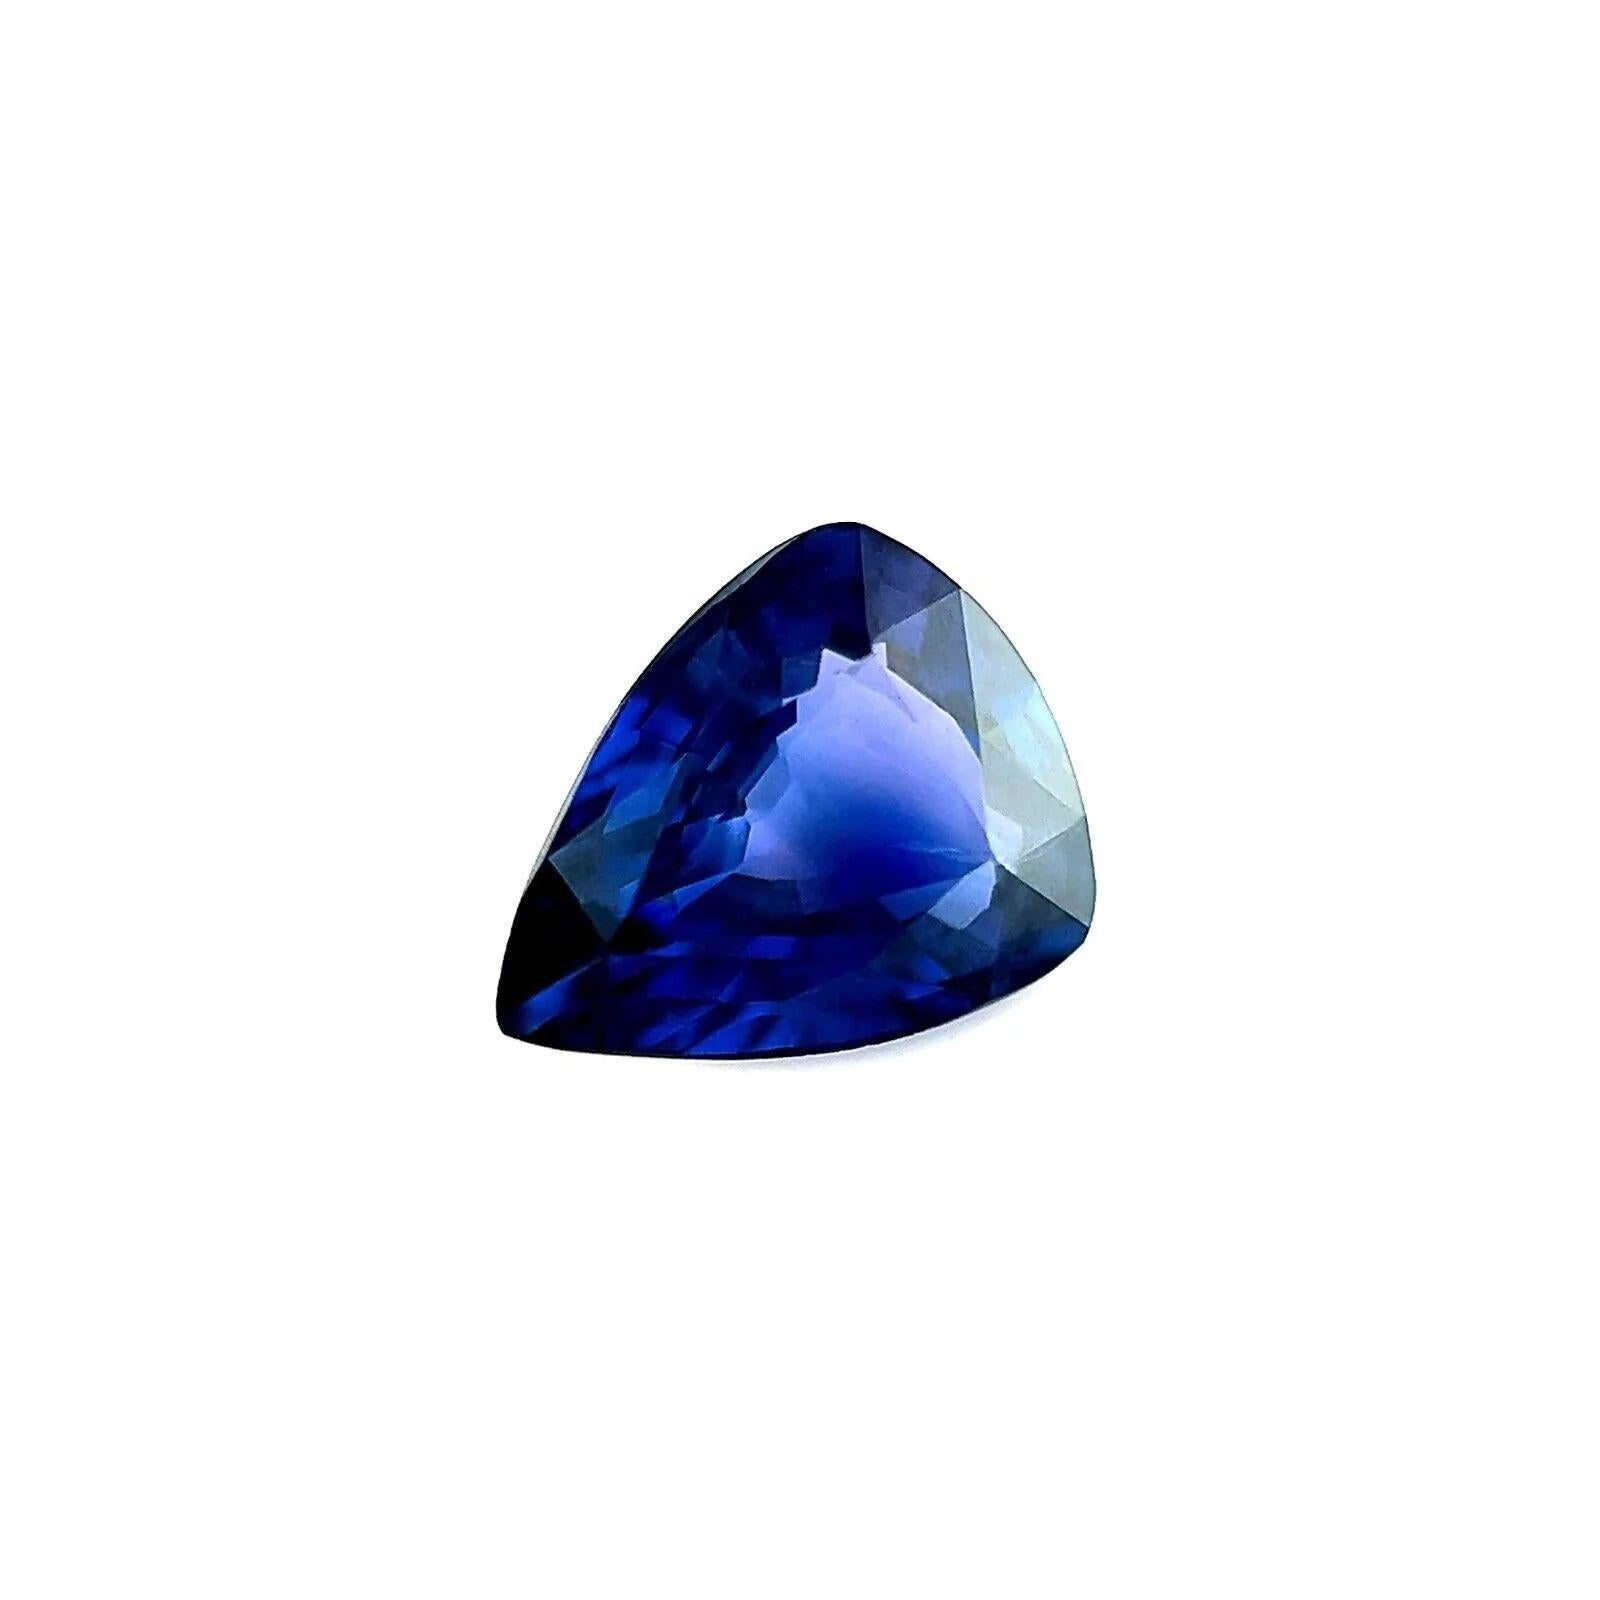 1.04ct Deep Blue GIA Certified Untreated Sapphire Pear Cut Rare Gem 7.3x5.8mm

GIA Certified Fine Blue Sapphire Gemstone.
1.04 Carat sapphire with a beautiful deep blue colour.
Fully certified by GIA confirming stone as natural. Standard heated like